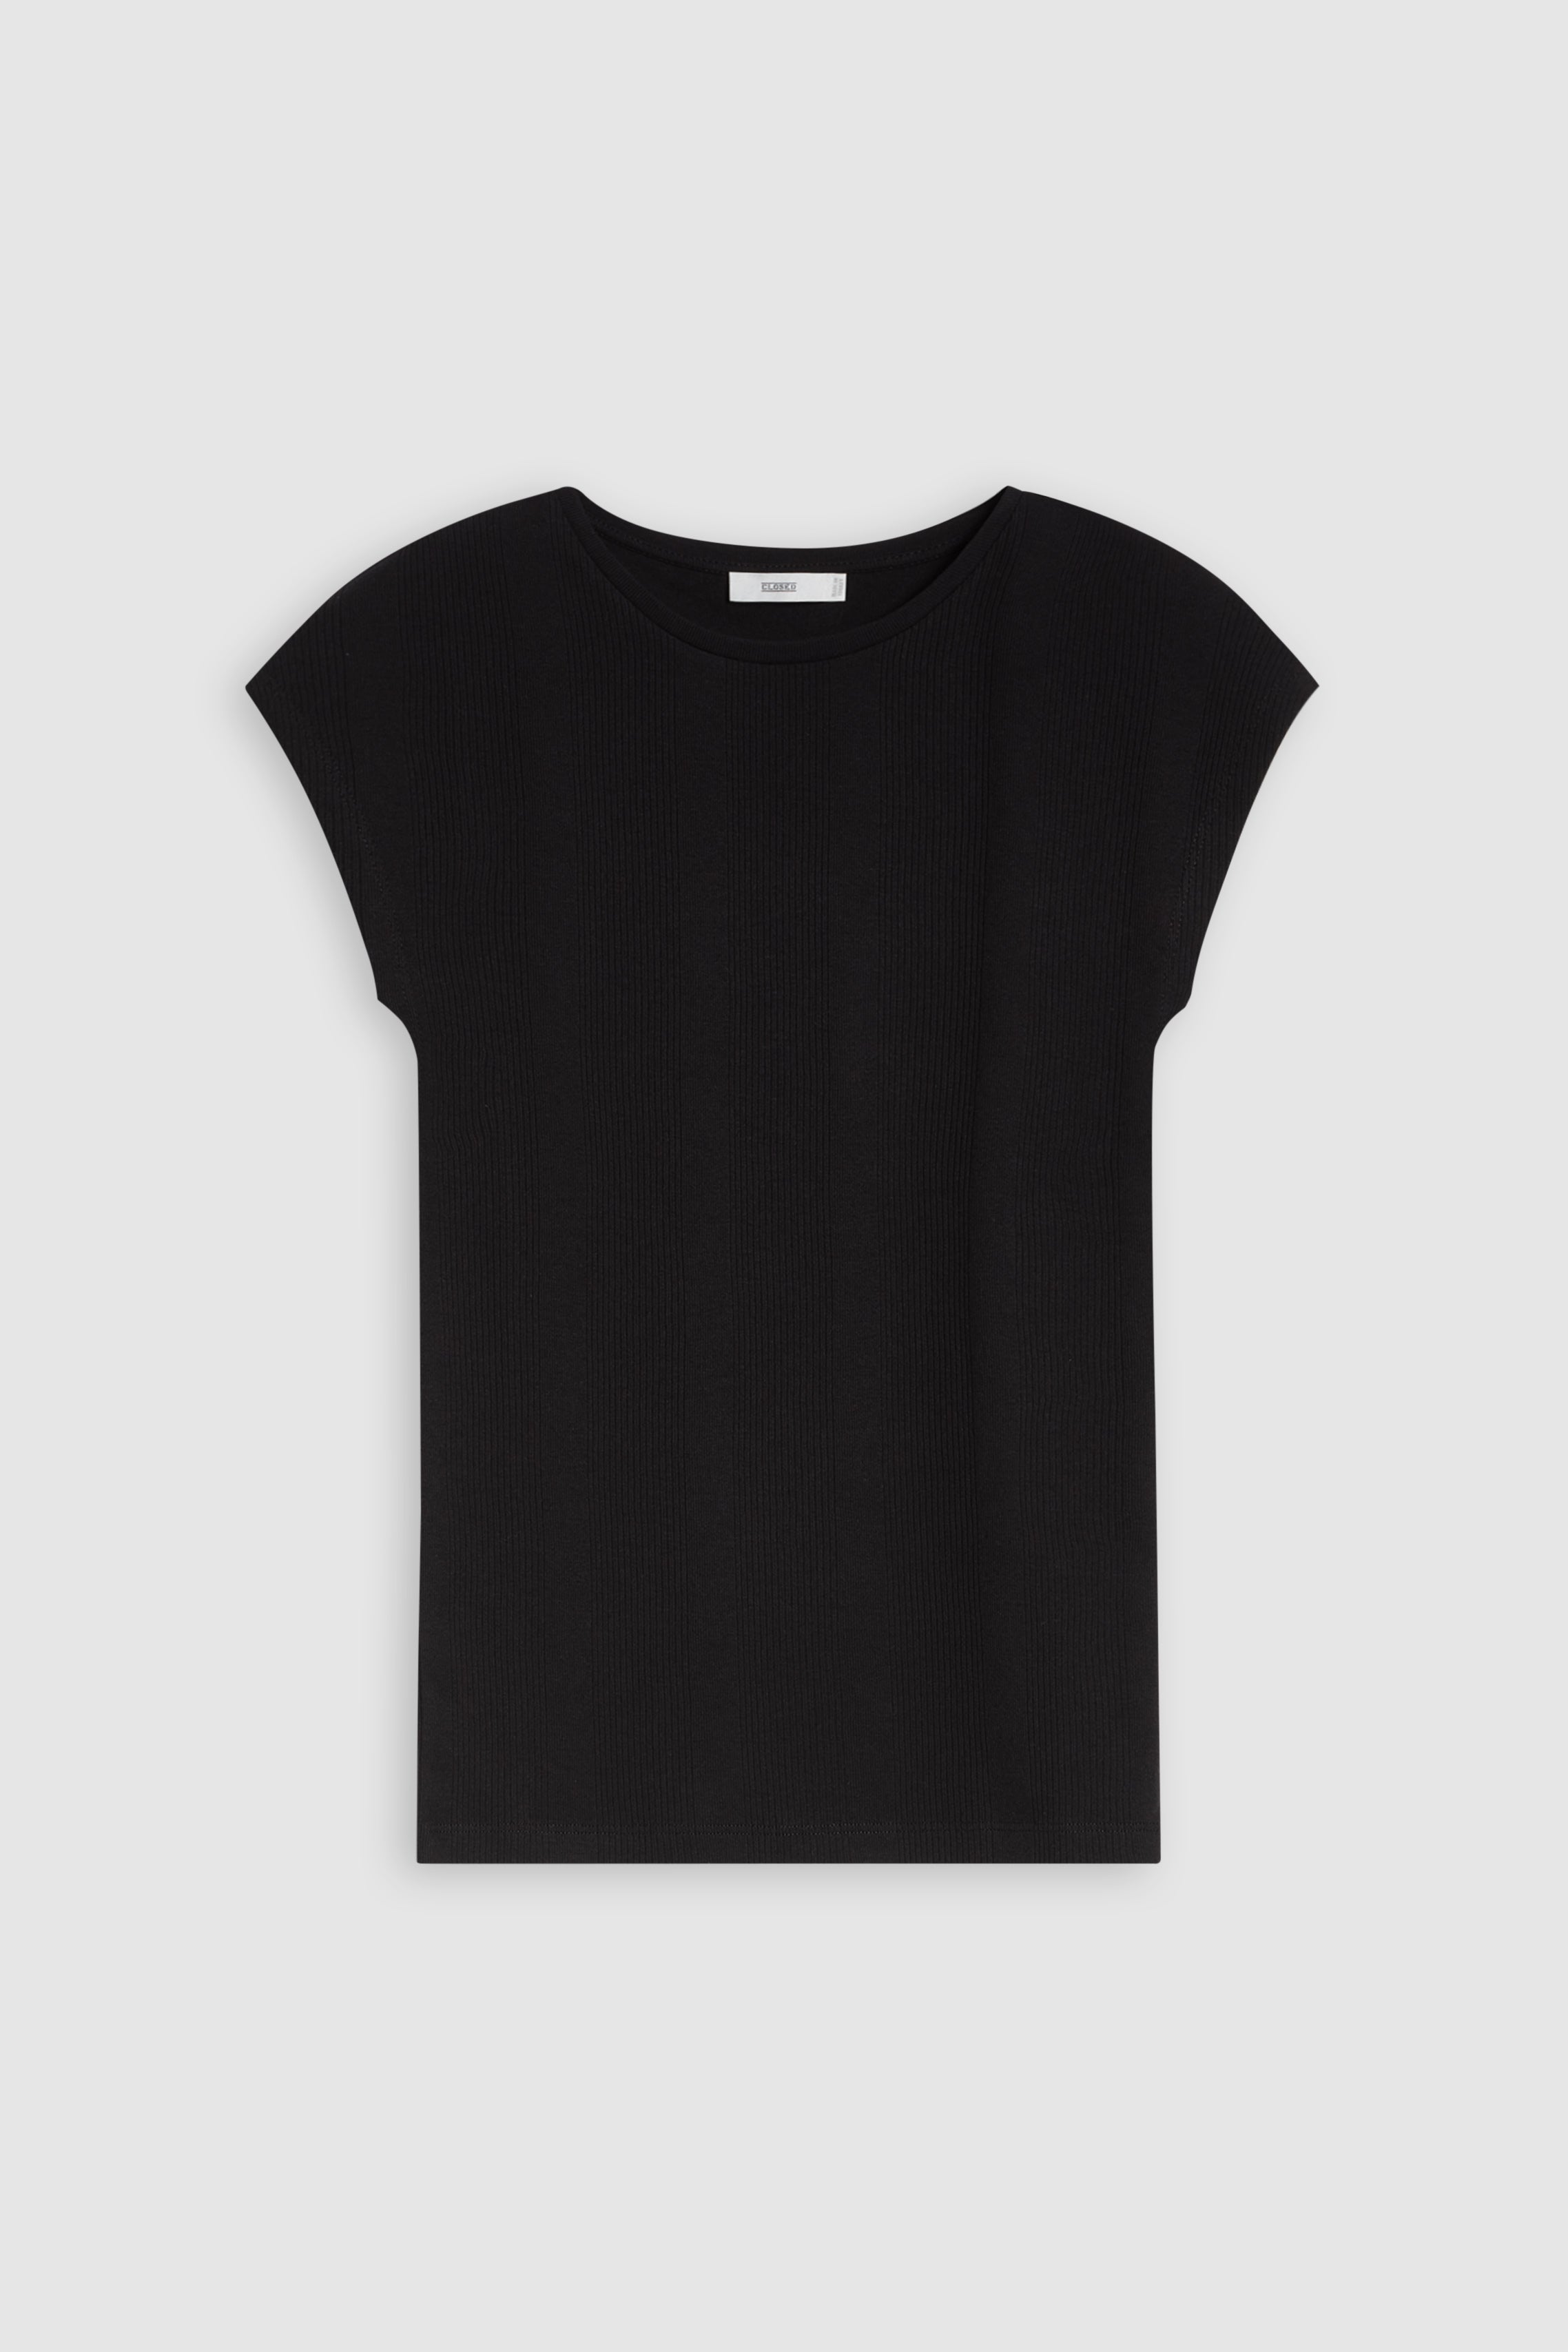 STYLE NAME CAP SLEEVE TOP T-SHIRTS